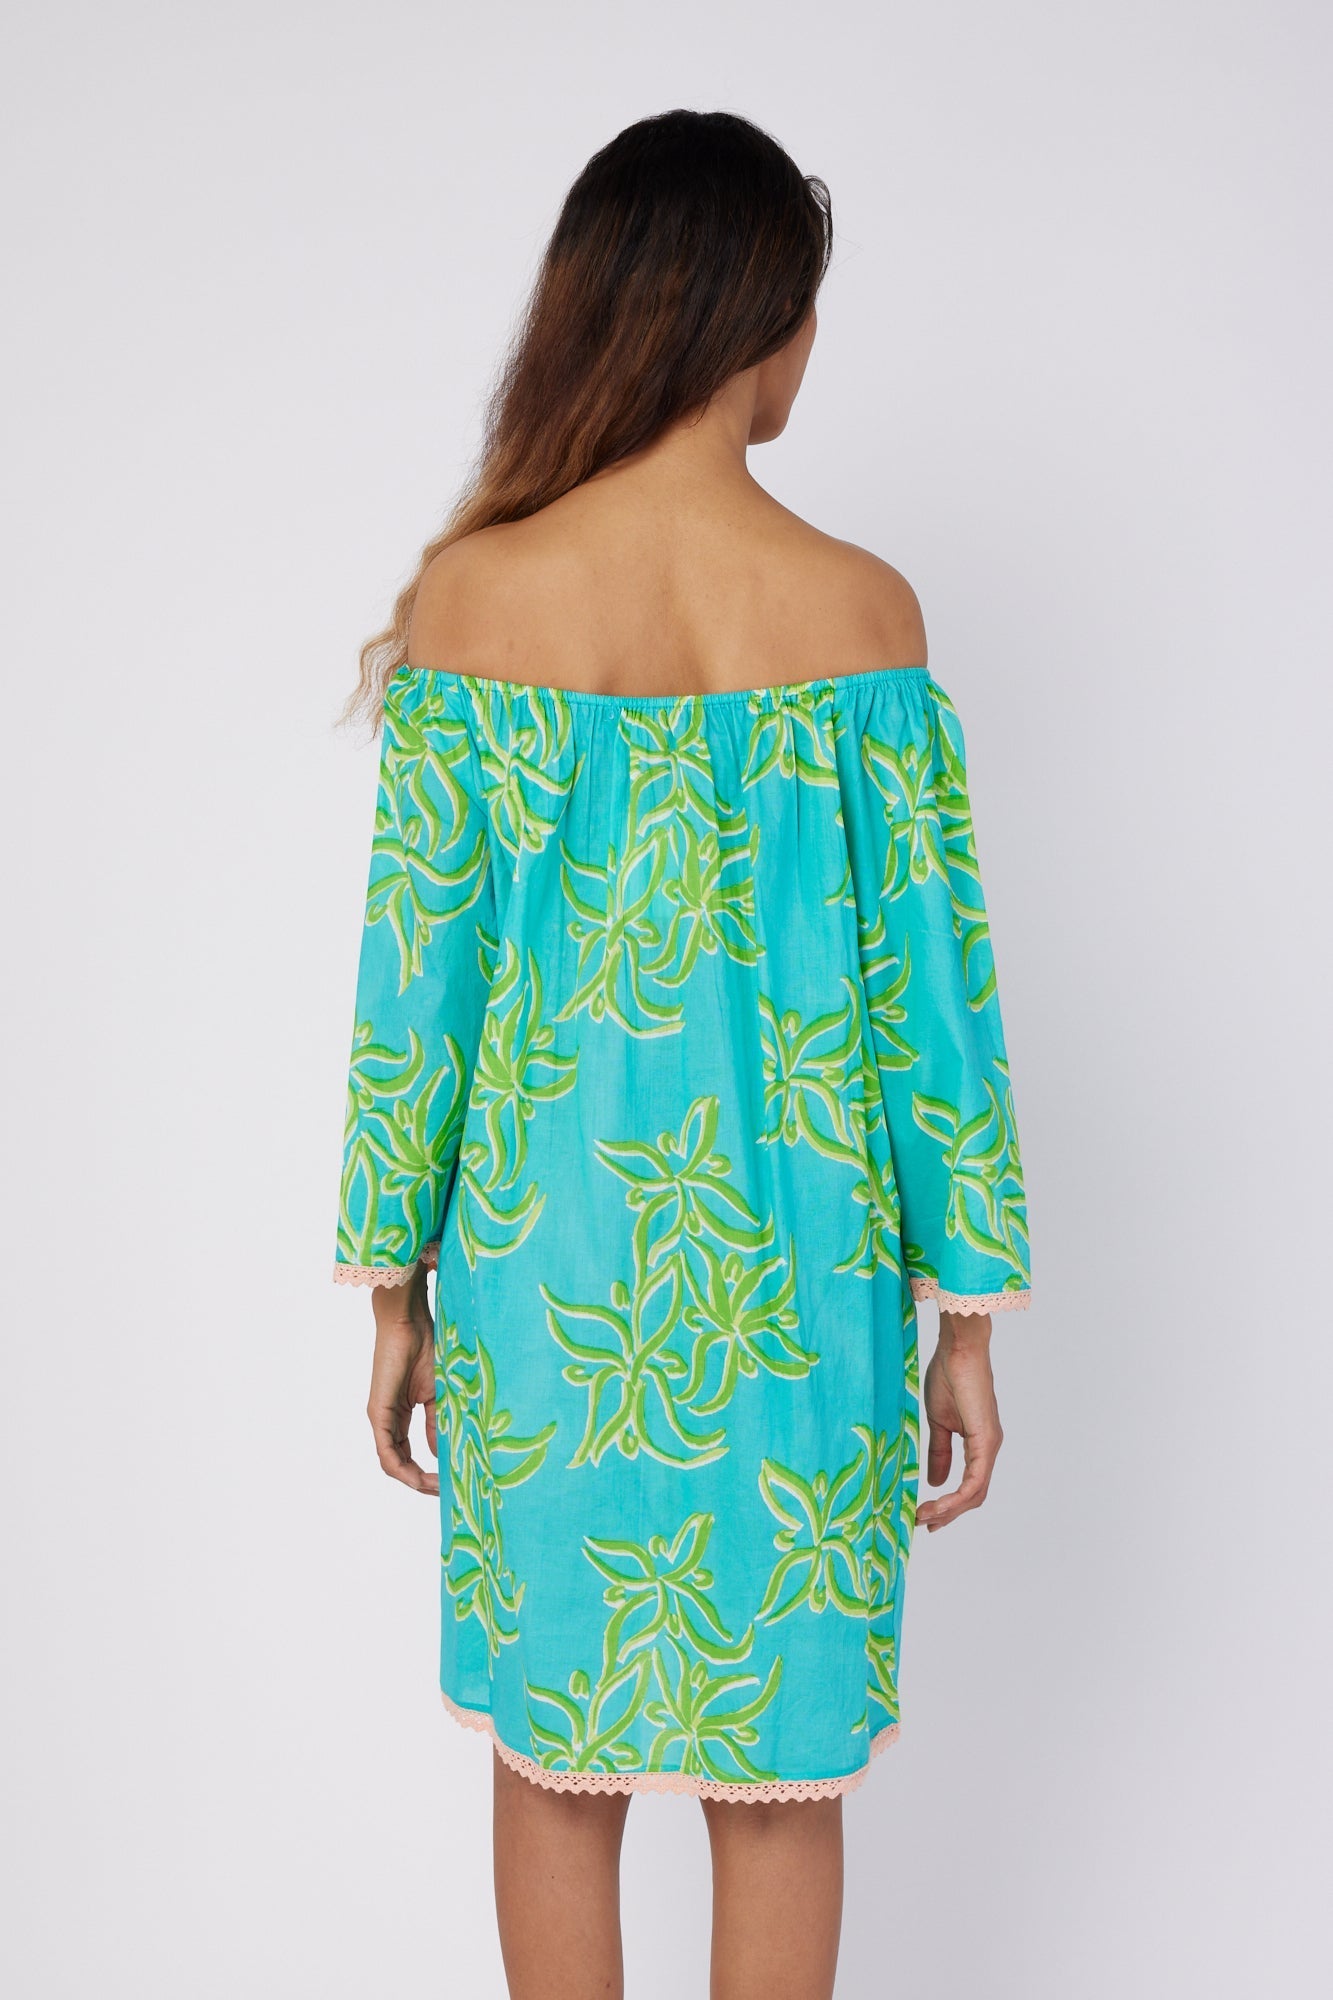 ModaPosa Alessandra Off The Shoulder Knee Length Dress in Green Abstract Flower . Discover women's resort dresses and lifestyle clothing inspired by the Mediterranean. Free worldwide shipping available!